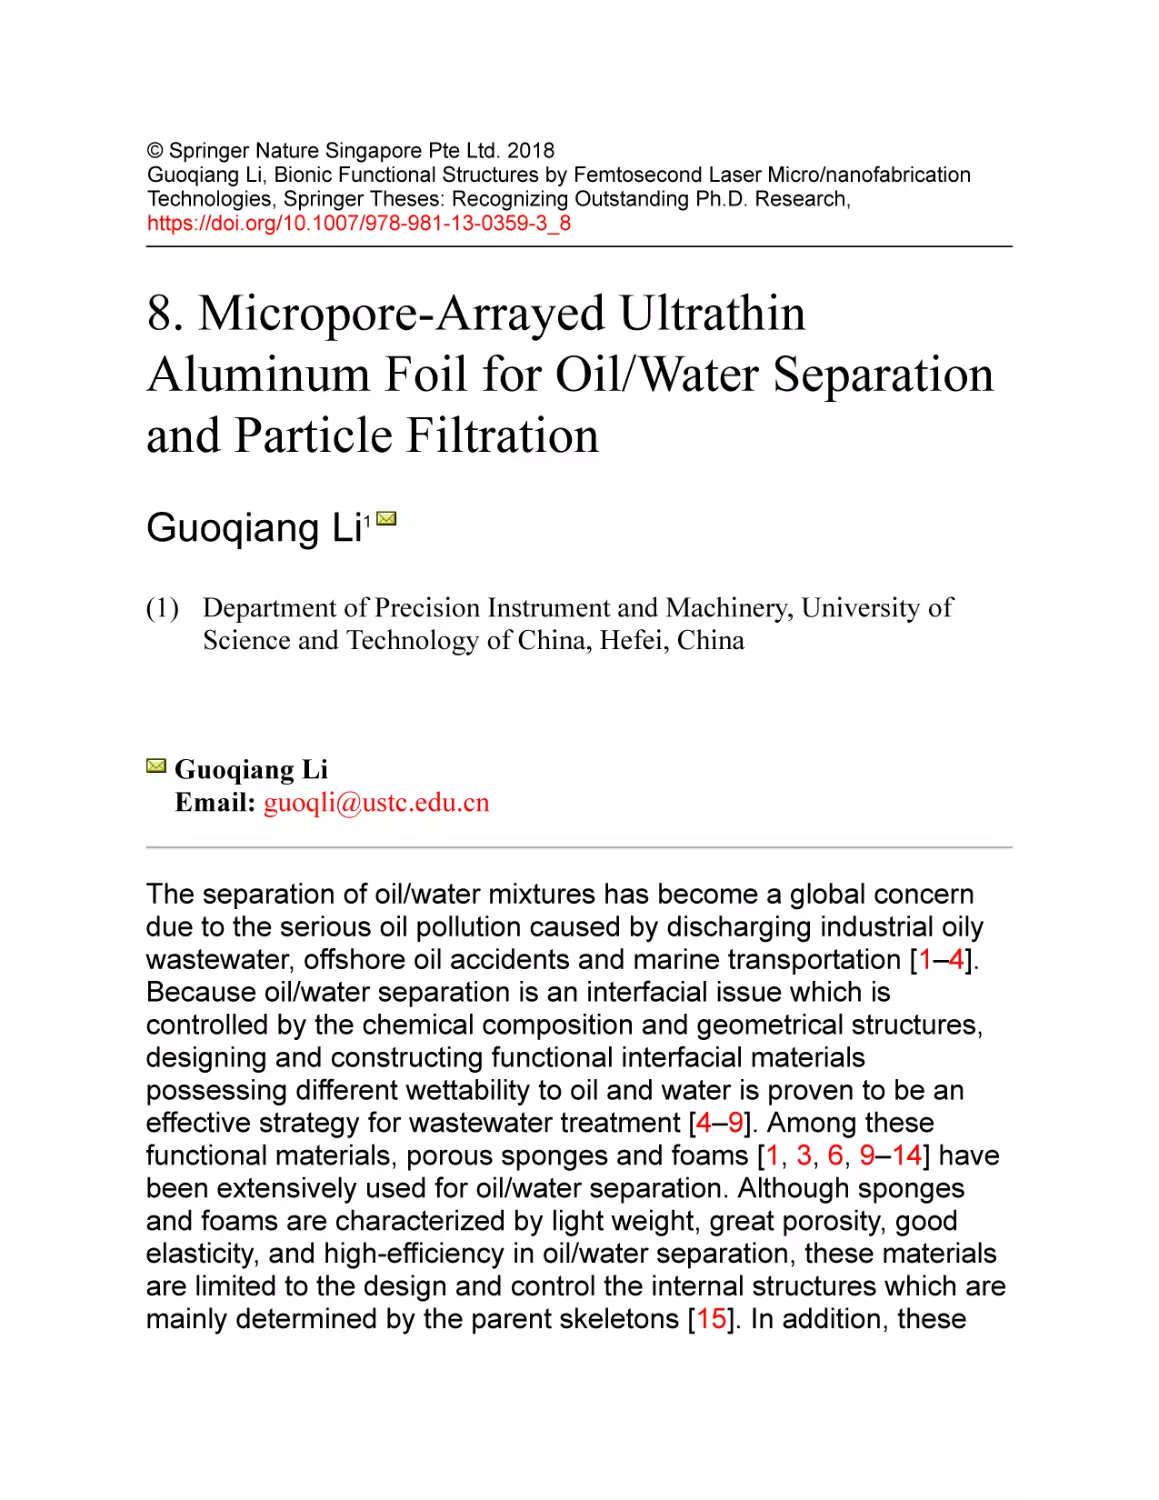 8. Micropore-Arrayed Ultrathin Aluminum Foil for Oil/Water Separation and Particle Filtration